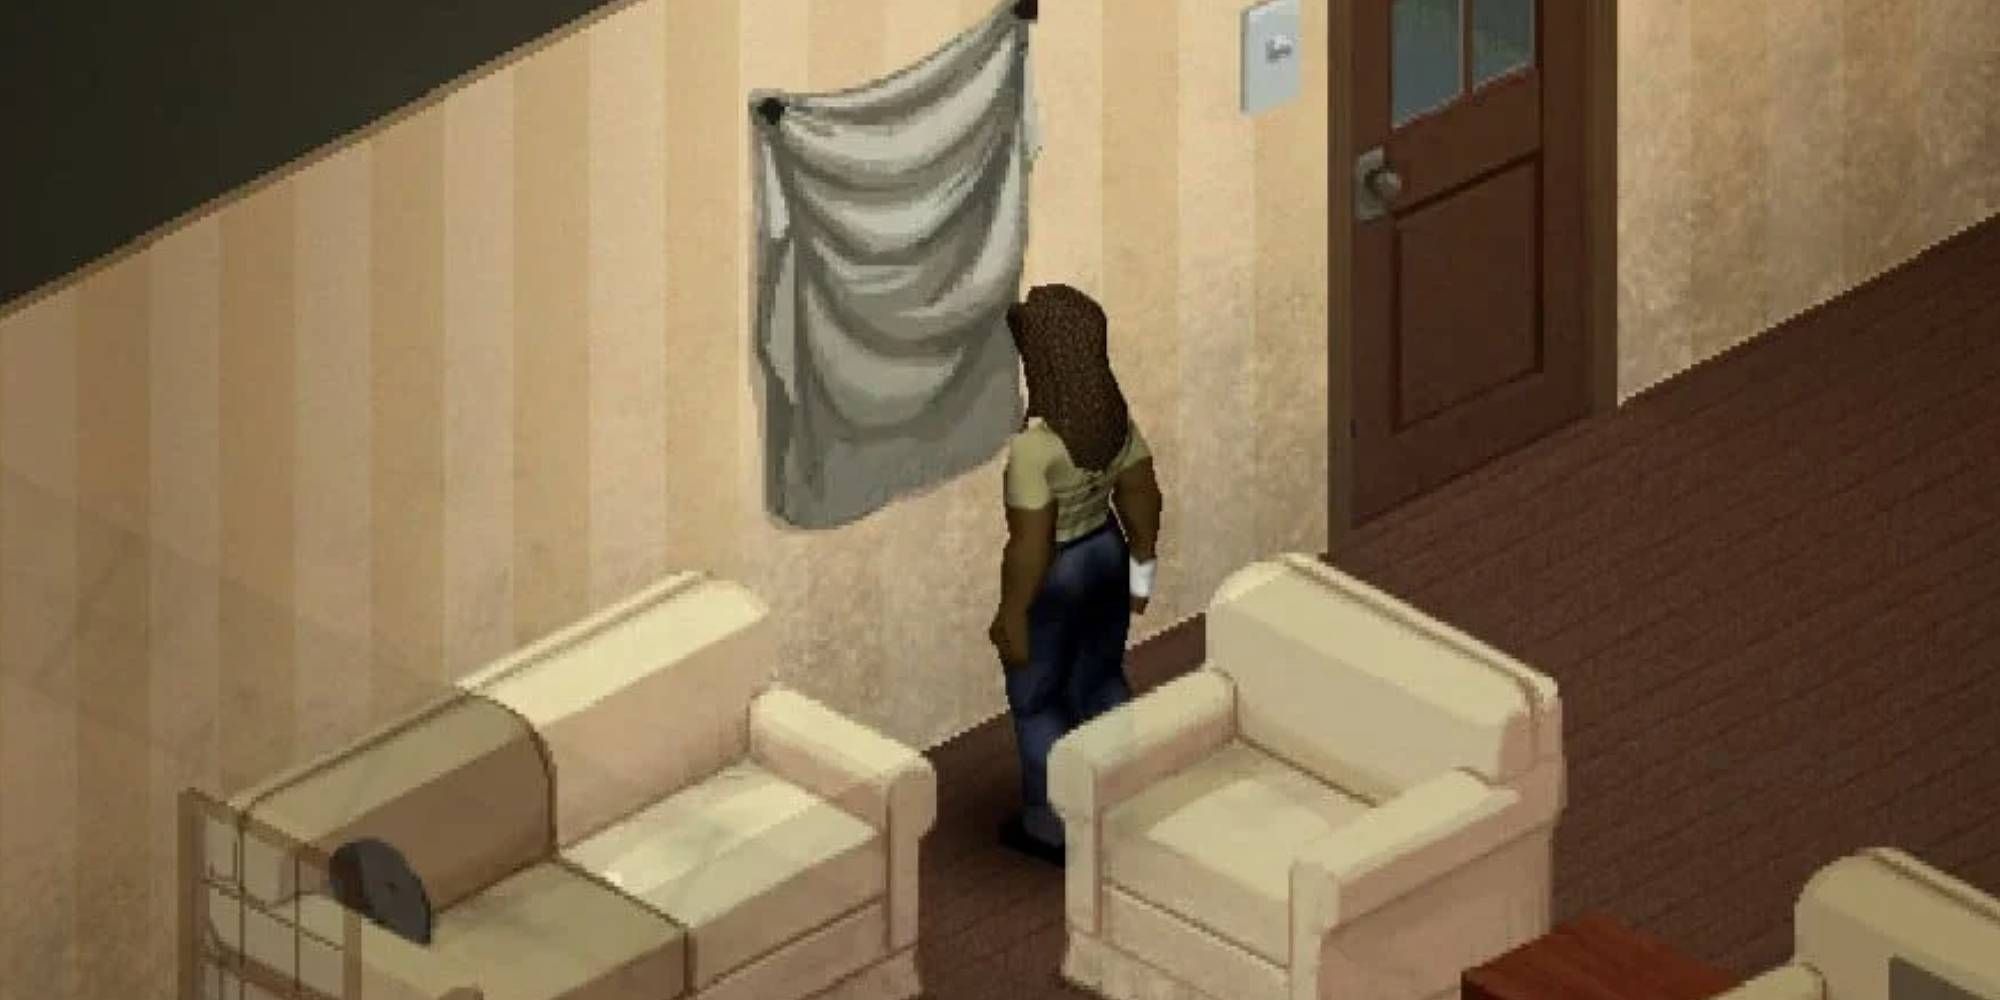 A woman staring at some sheets covering a window